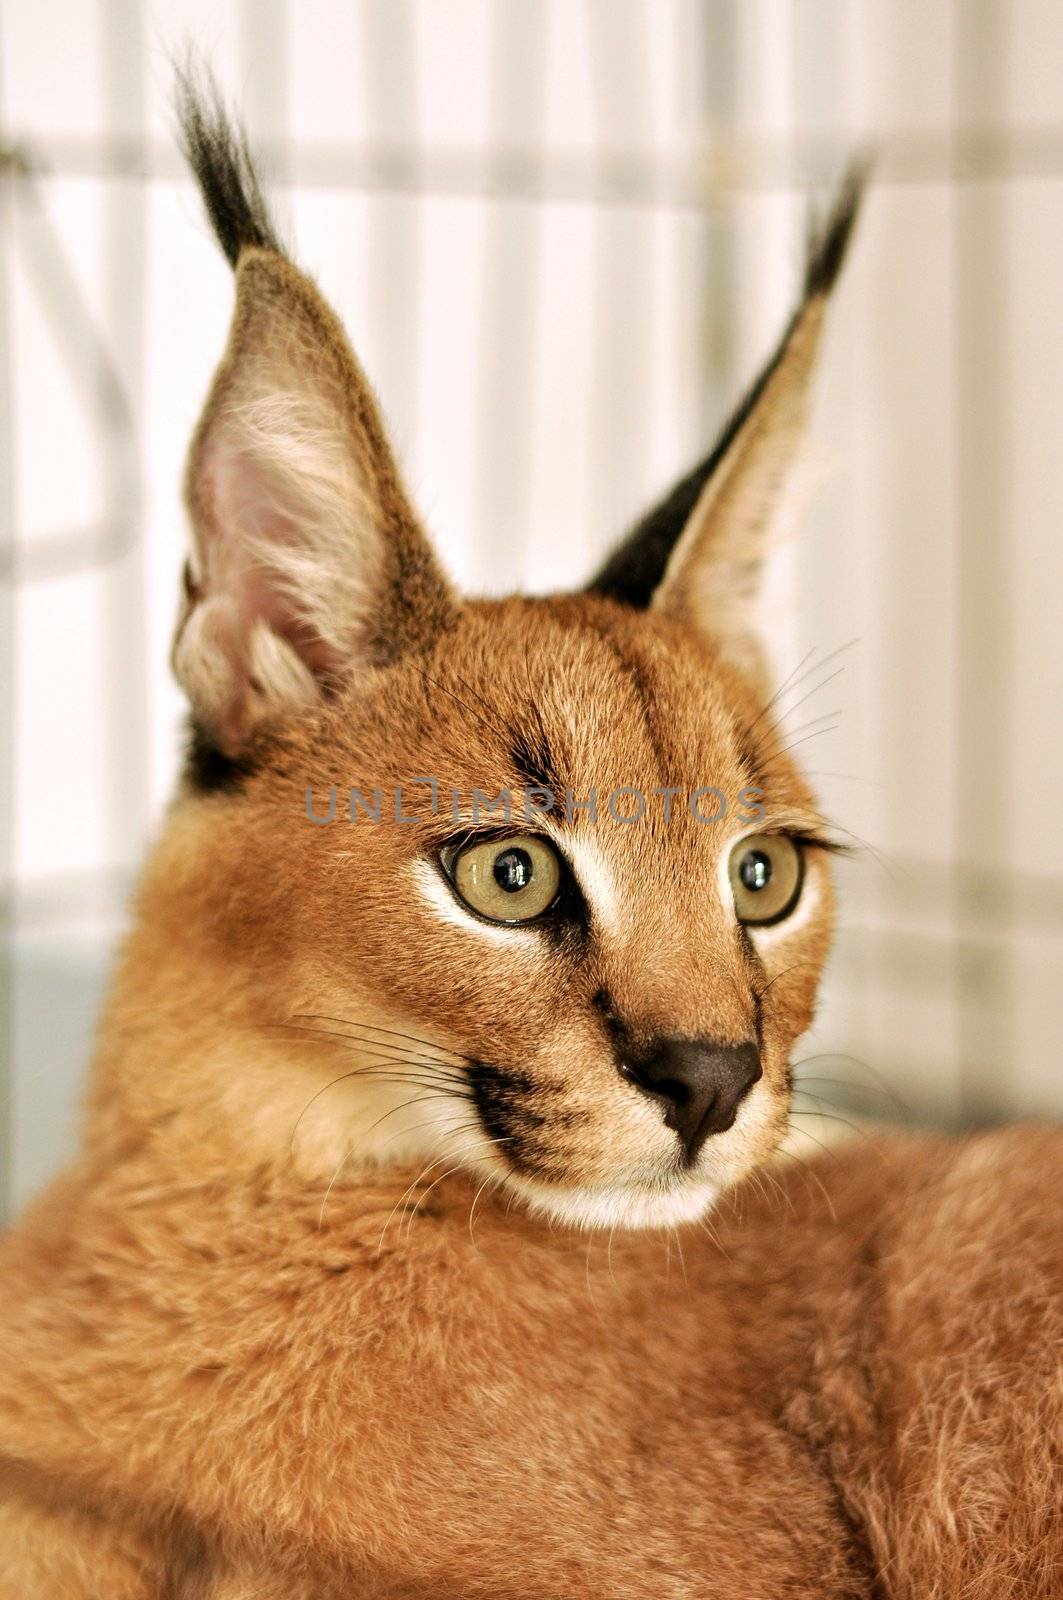 The caracal is a fiercely territorial medium-sized cat ranging over Western Asia, South Asia and Africa.